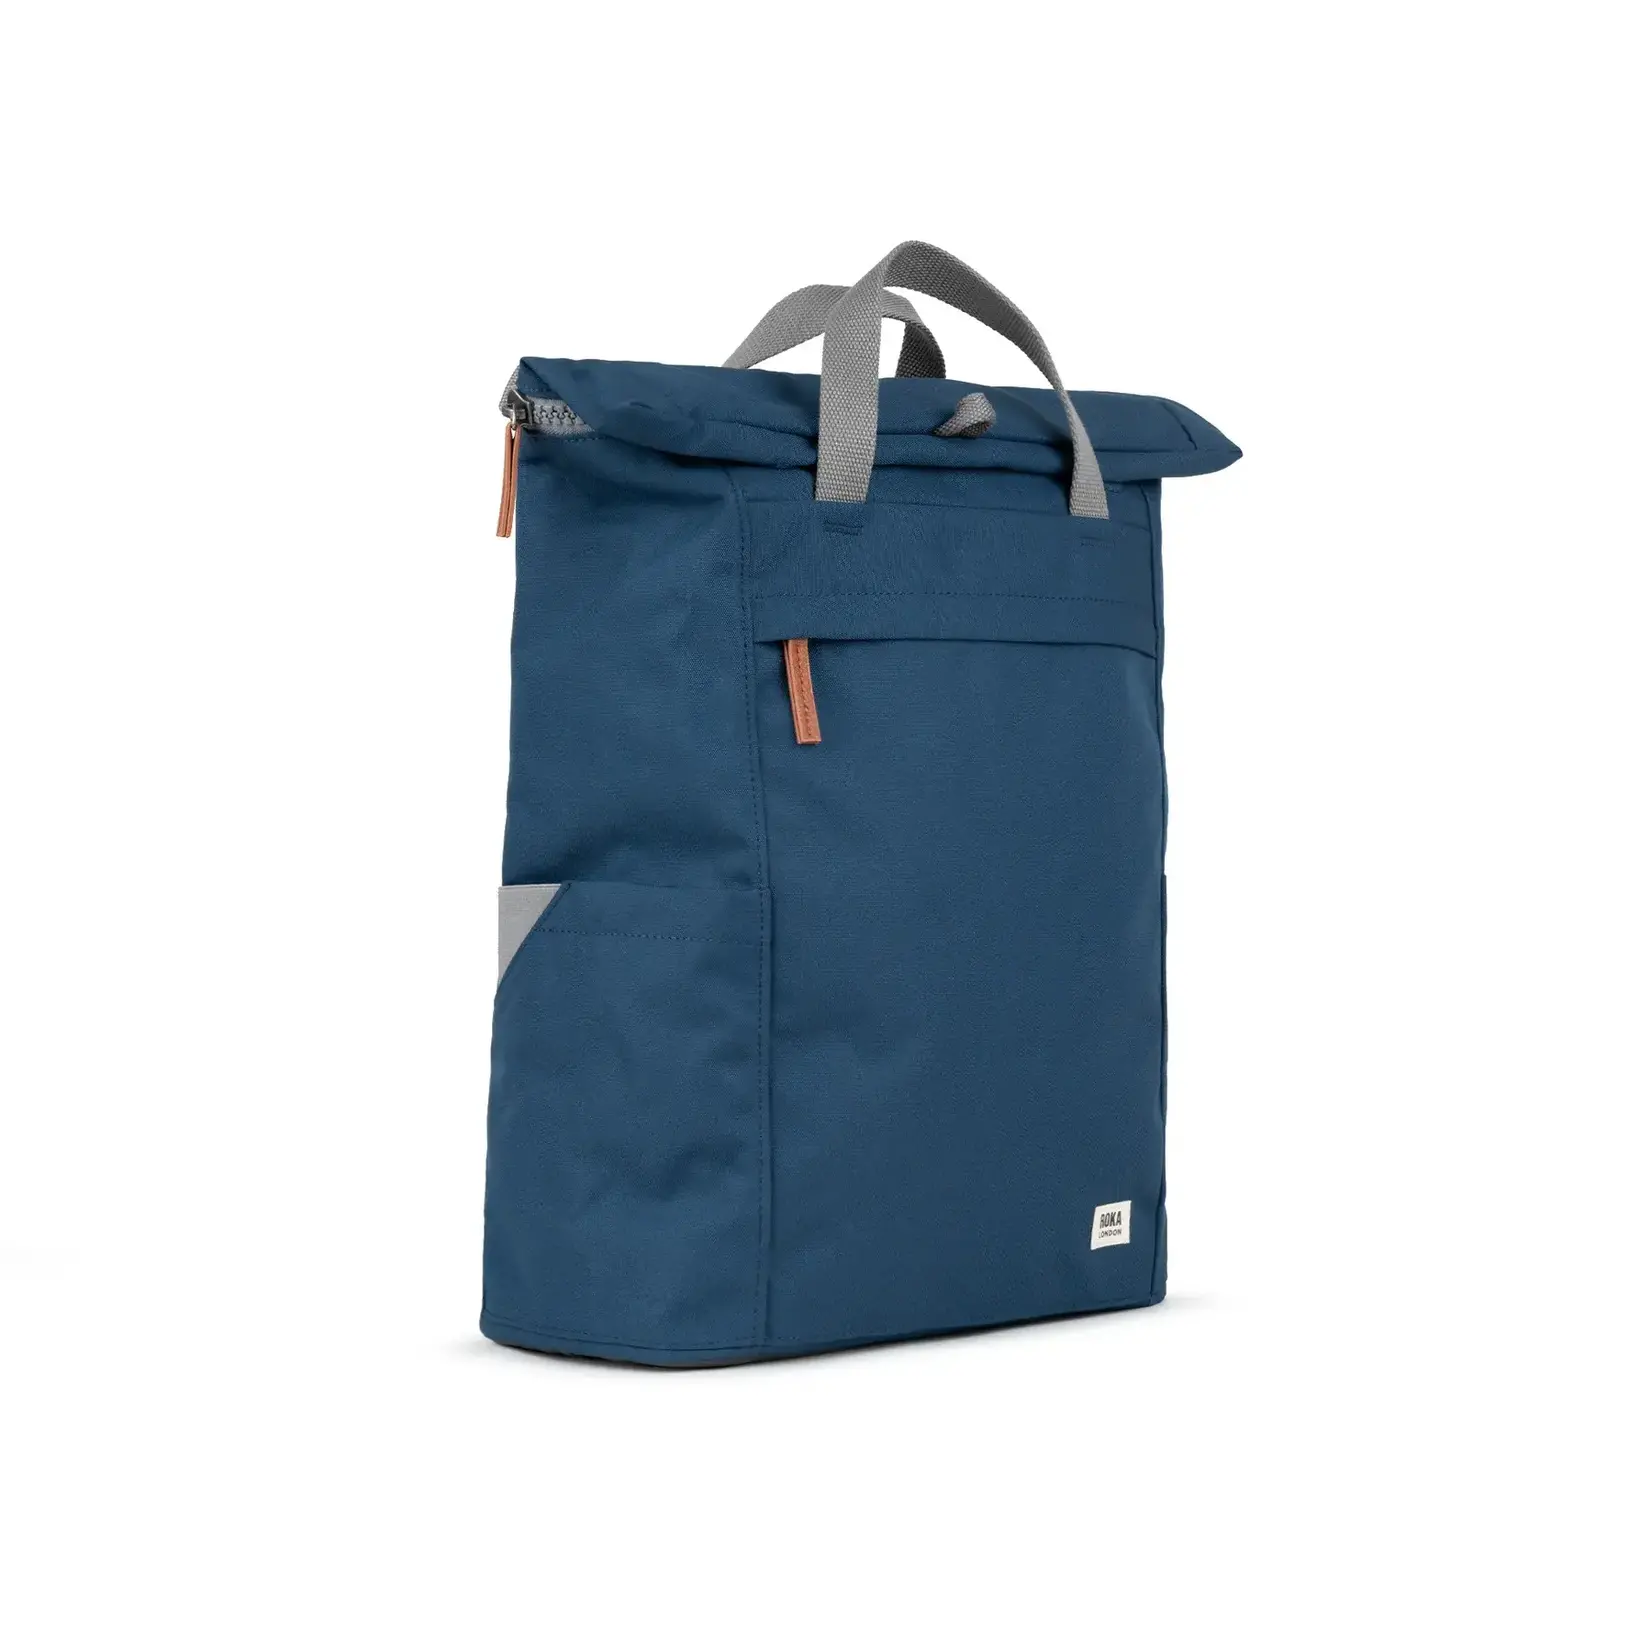 ROKA London Finchley A Deep Blue Recycled Canvas 12-15 recycled bottles